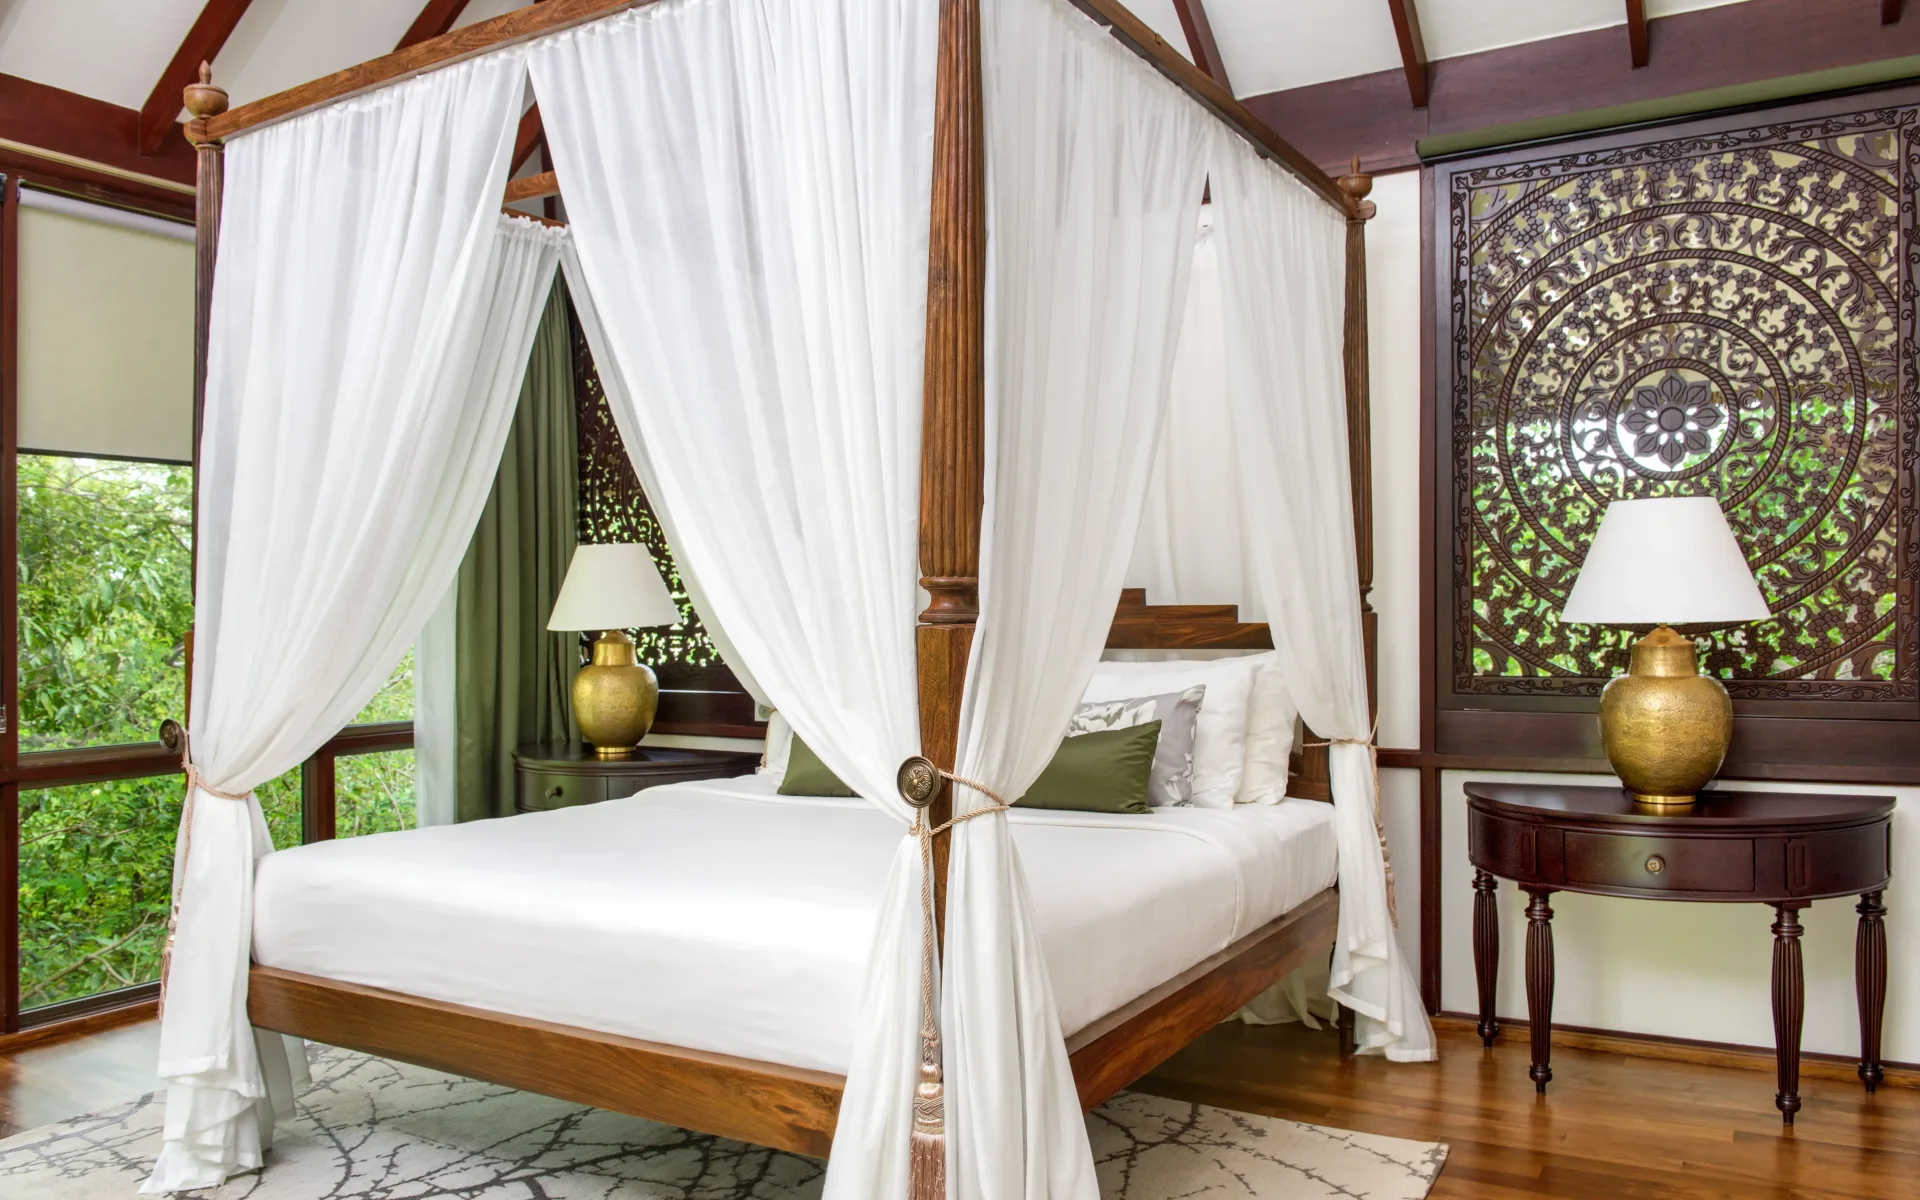 A four-poster bed is surrounded by intricate decor and dressed in soft, white bedding.